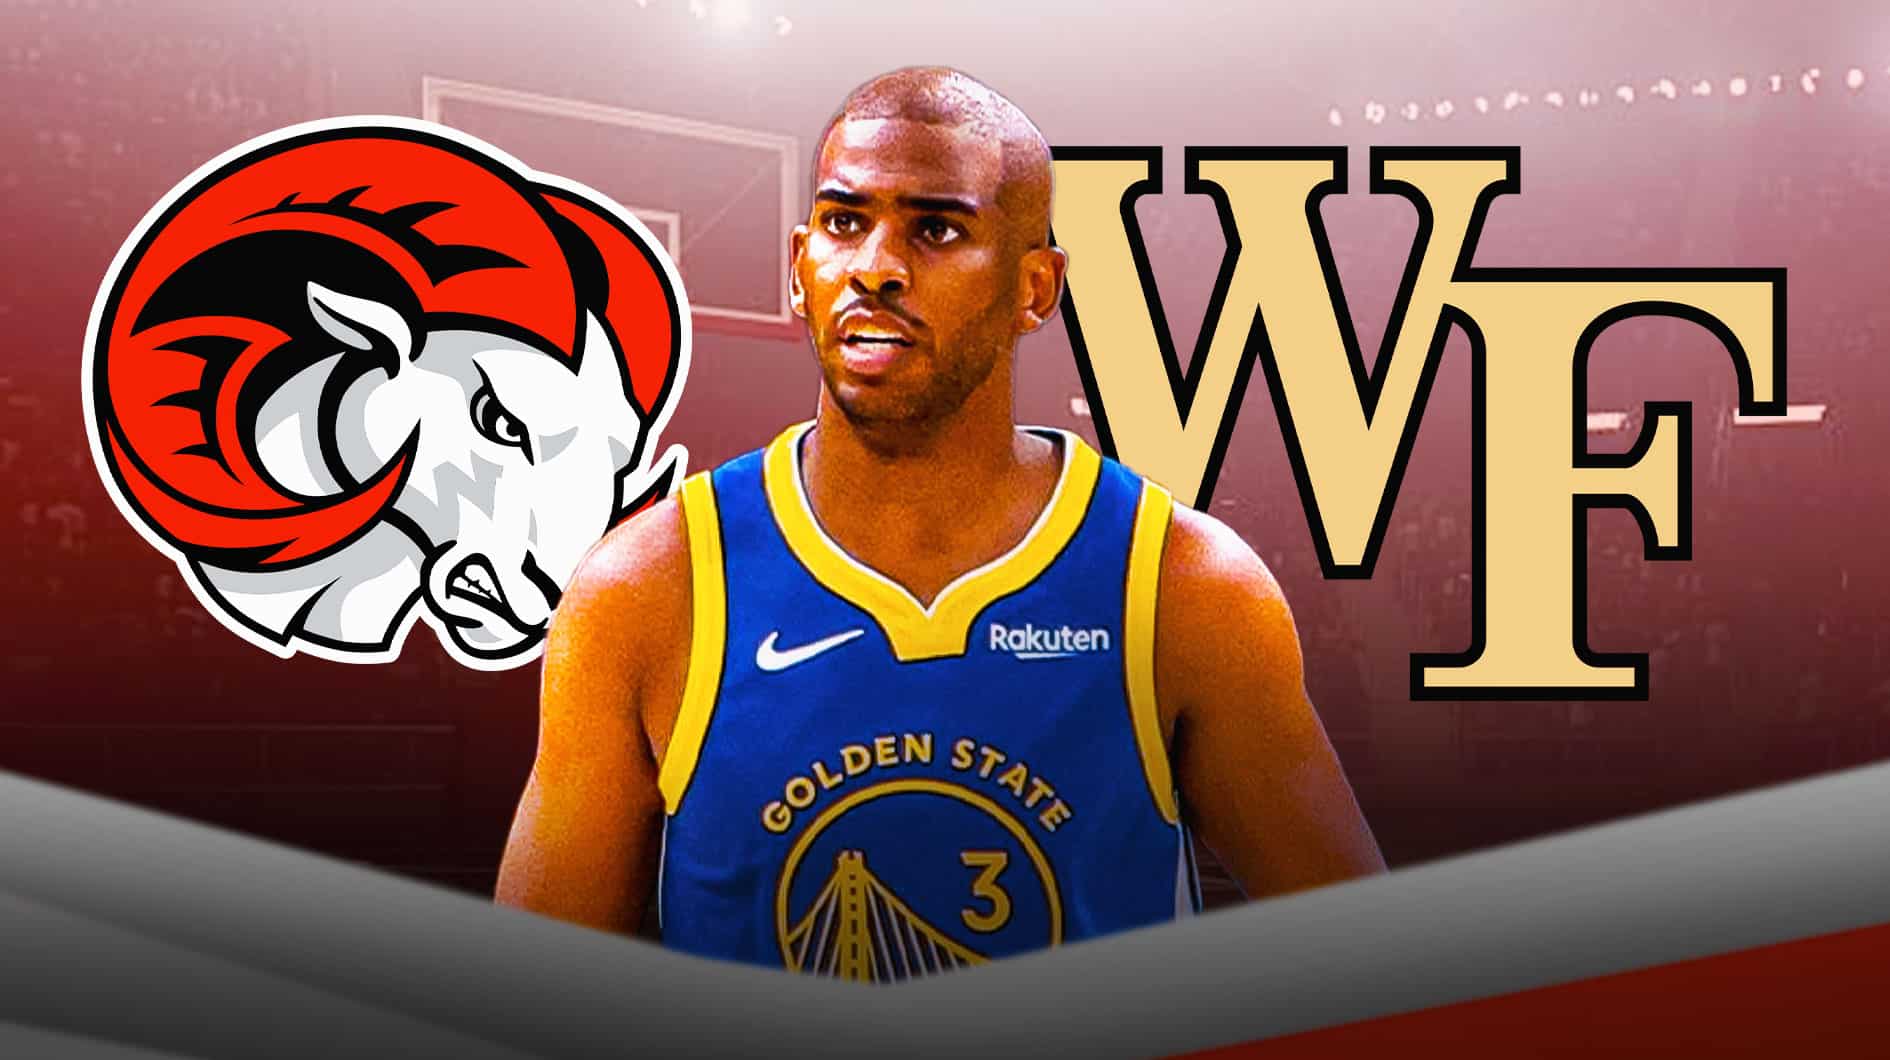 Chris Paul keeps it real on why he attended Wake Forest instead of an HBCU